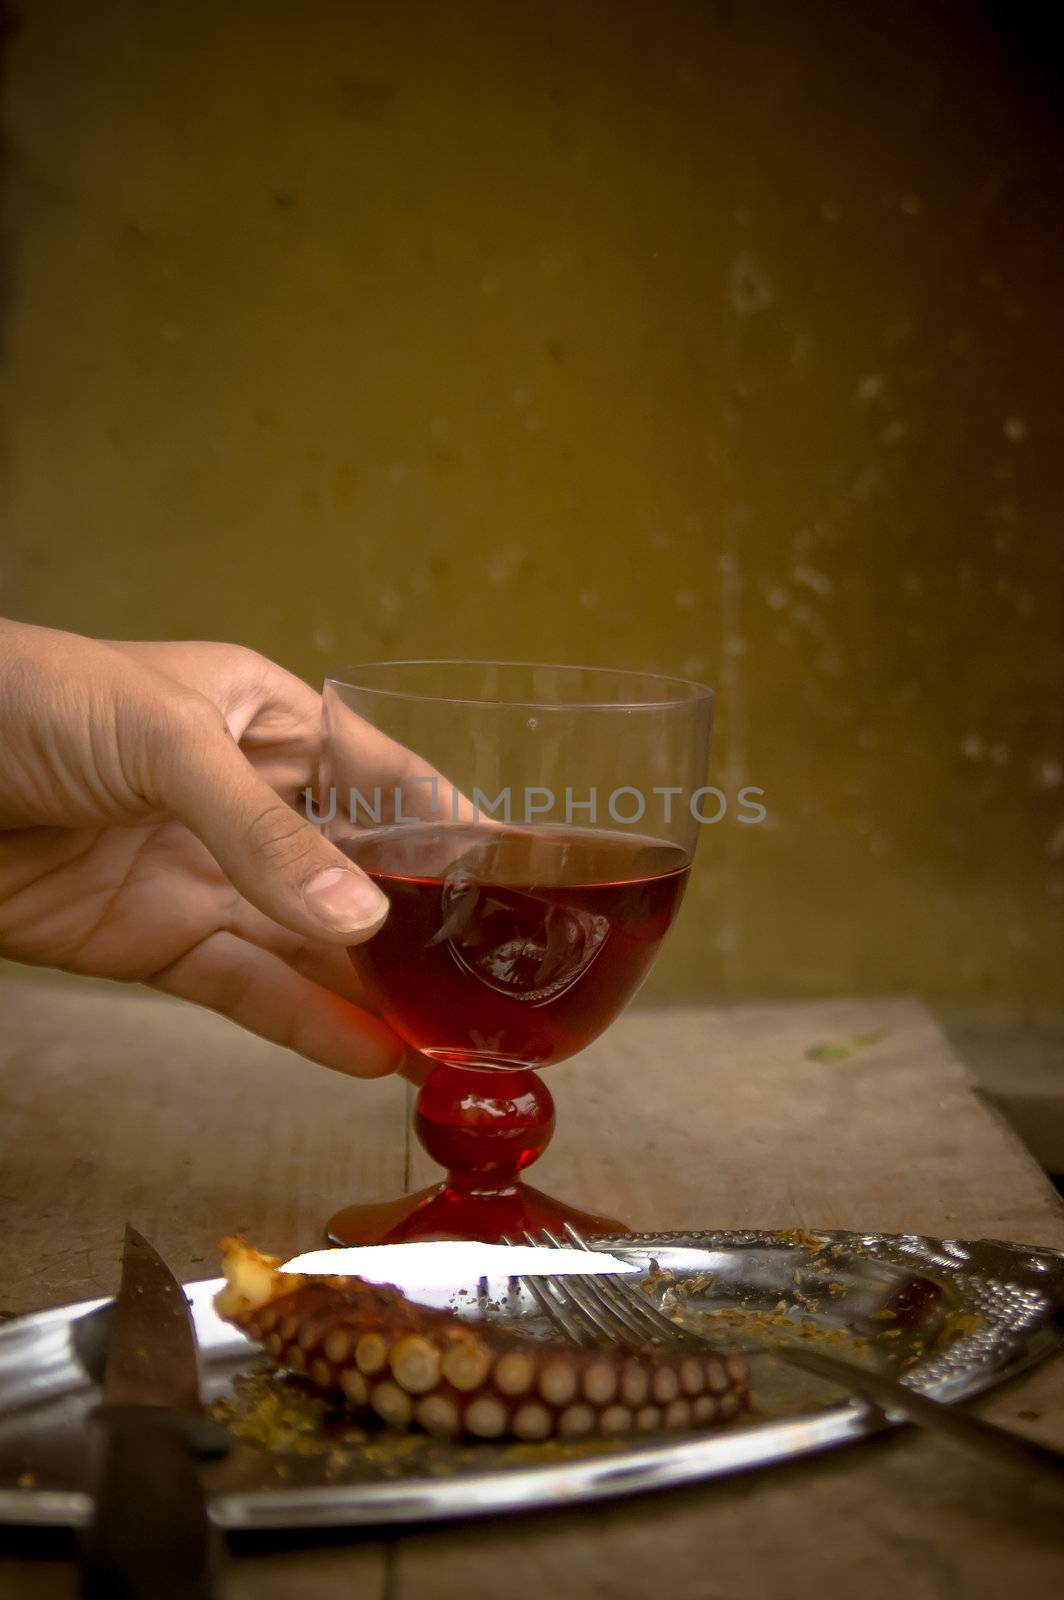 A hand holding a glass with red wine and a plate with barbecued octopus piece